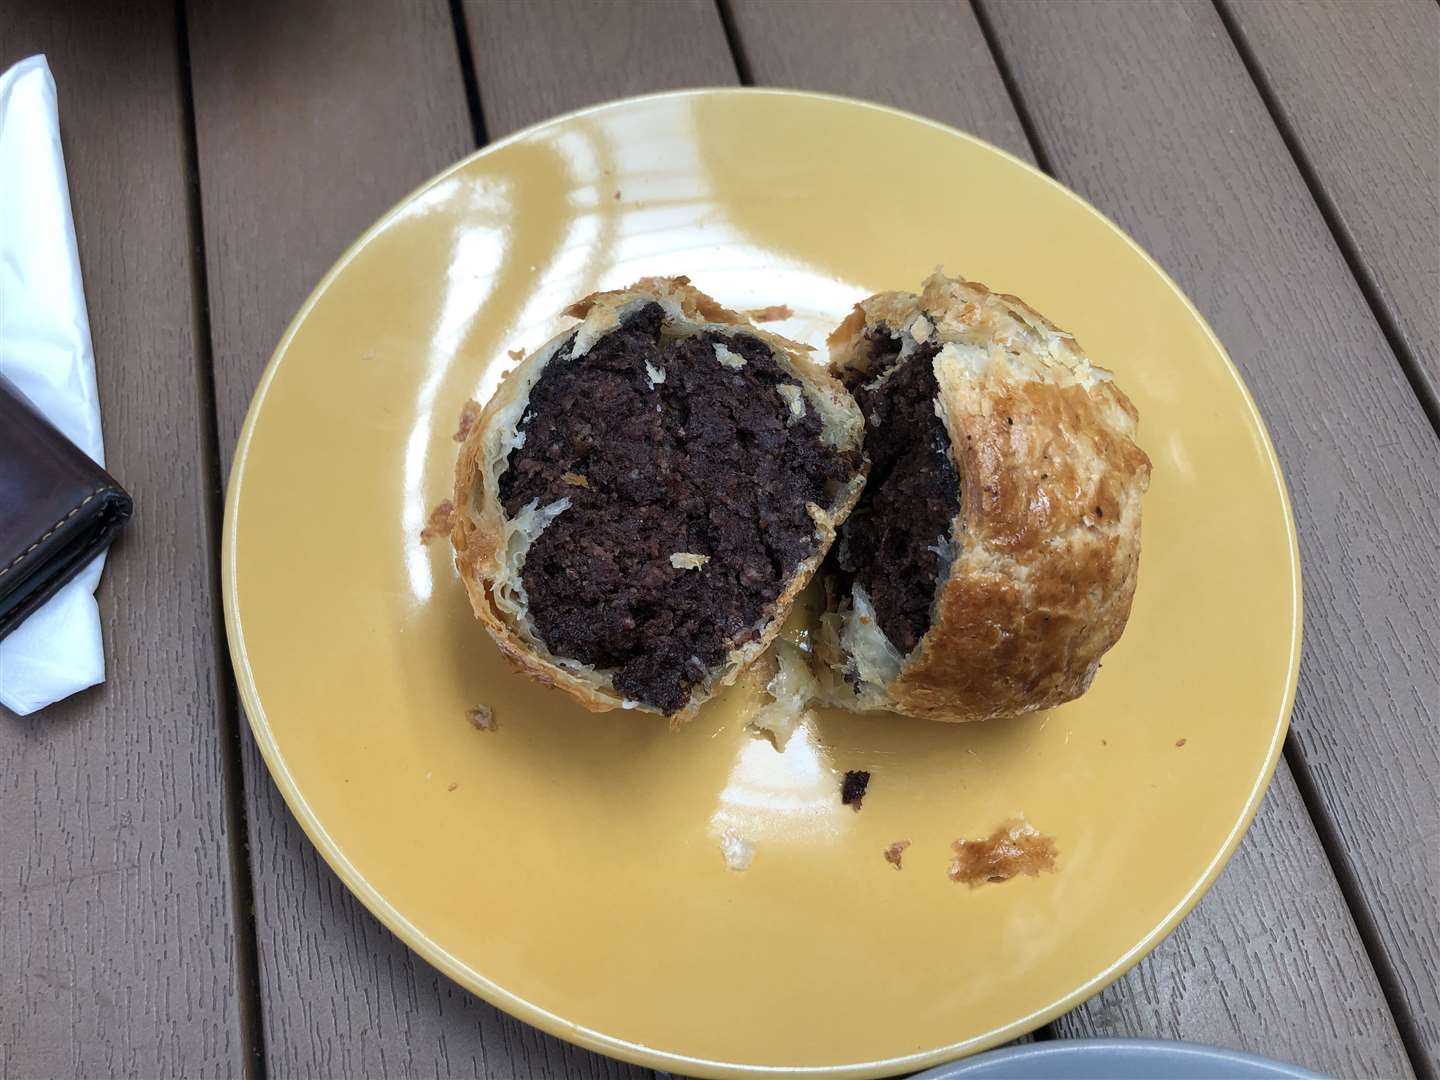 The inside of the sausage and black pudding roll